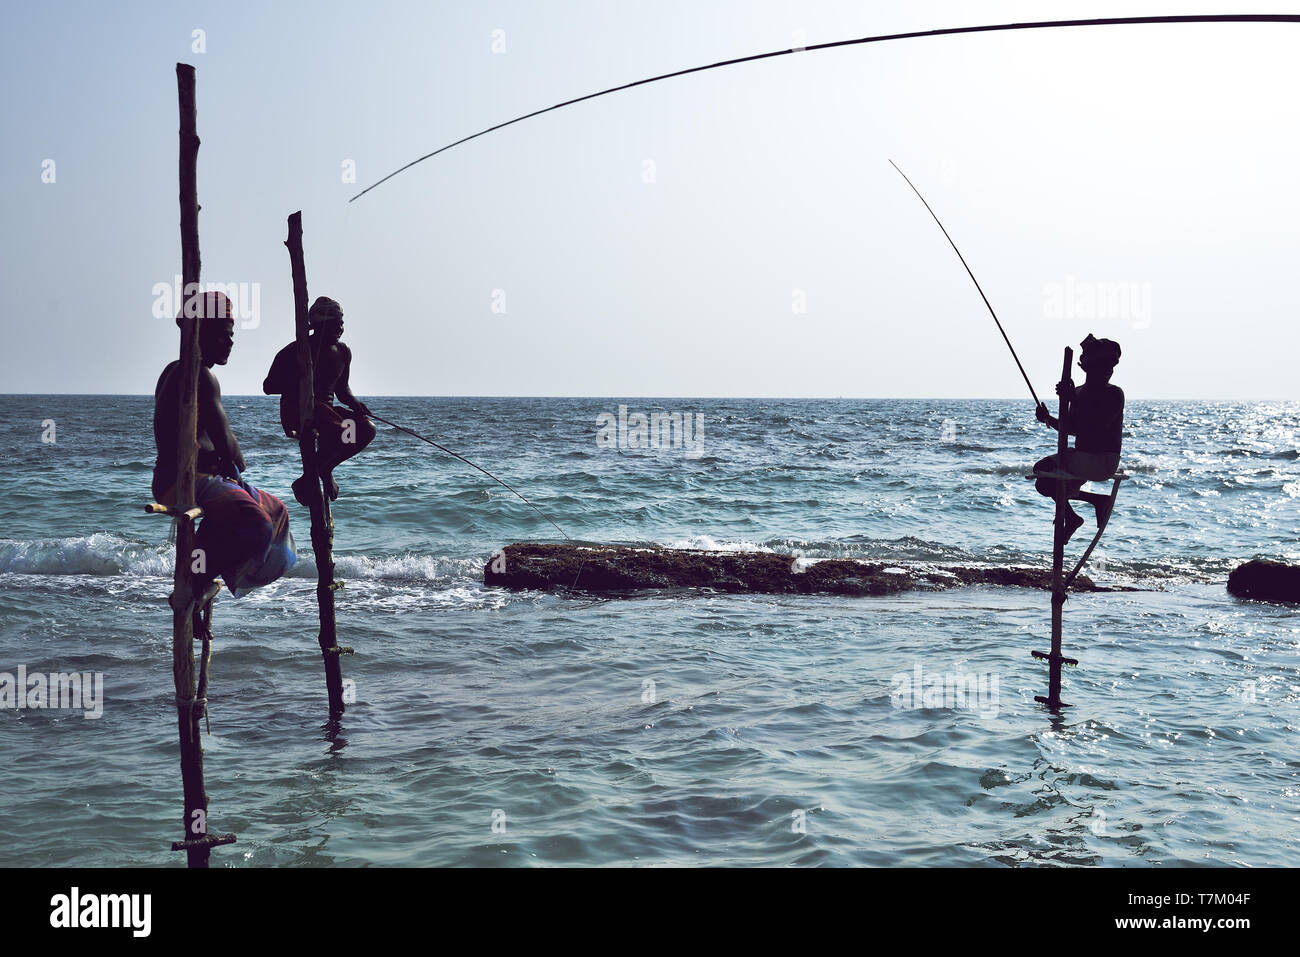 https://c8.alamy.com/comp/T7M04F/the-local-fishermen-are-fishing-in-unique-style-the-standing-on-the-single-timber-pole-can-only-found-in-this-indian-ocean-T7M04F.jpg